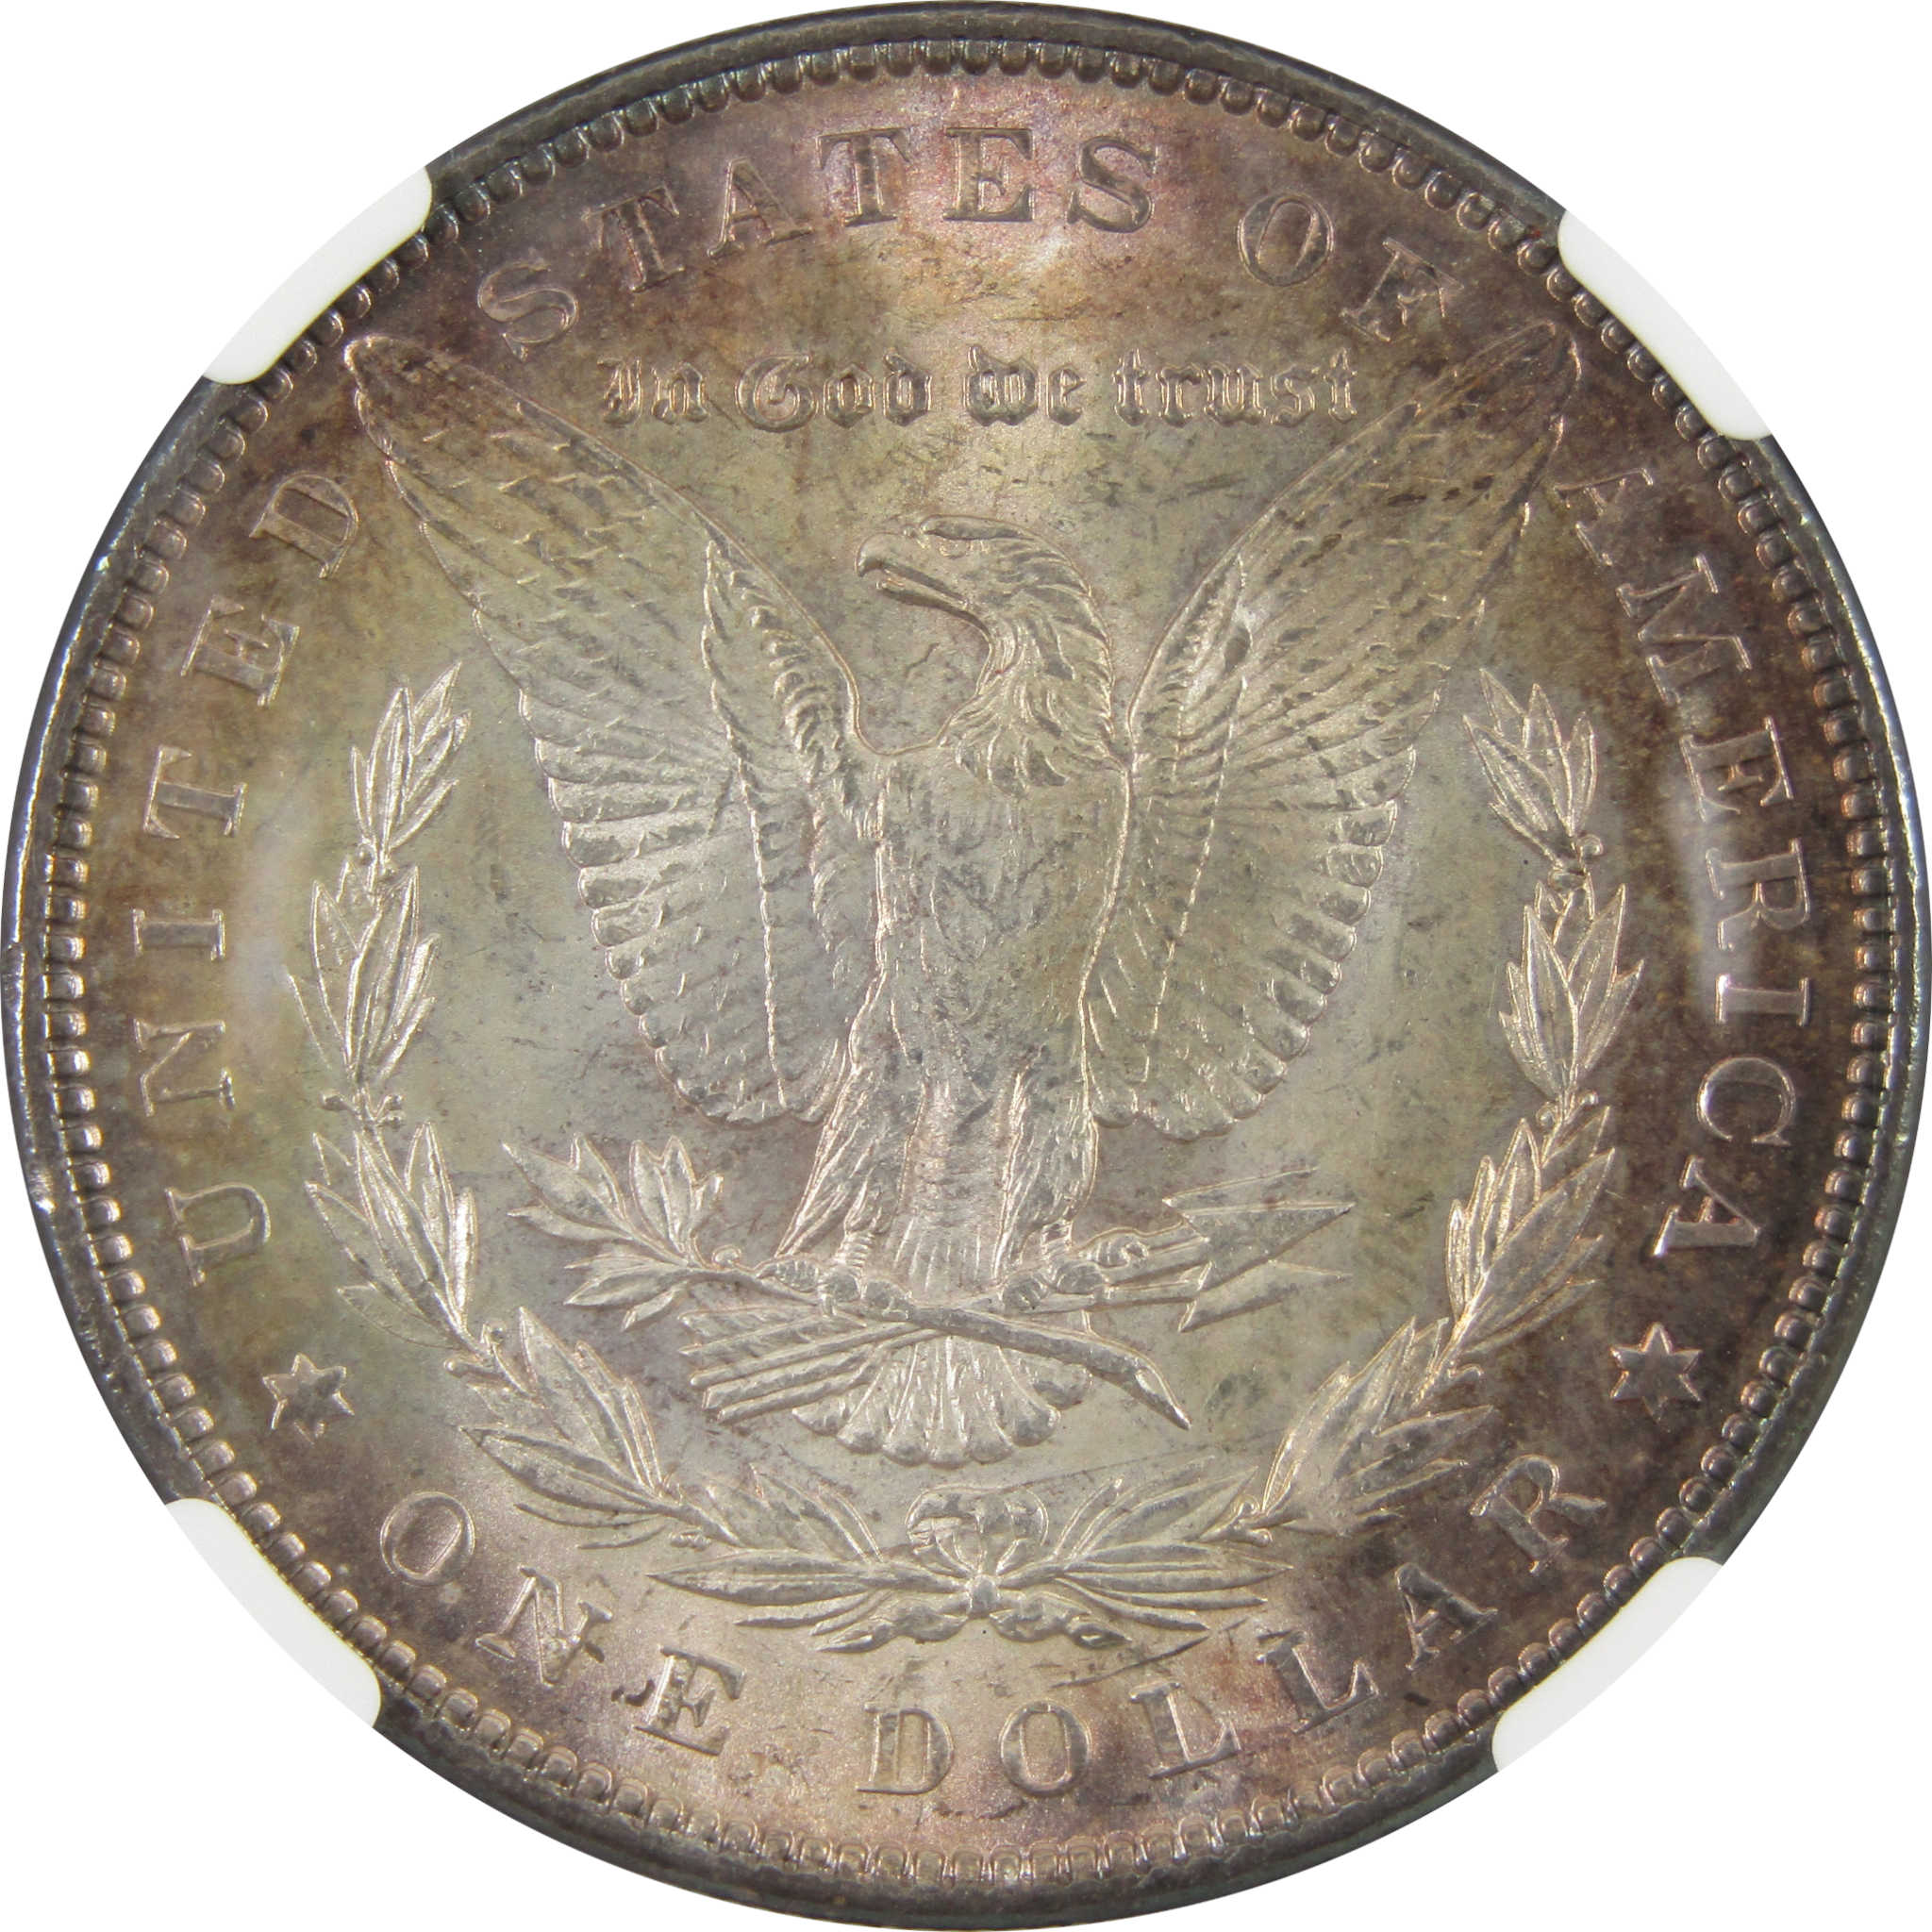 1899 Morgan Dollar MS 64 NGC Silver $1 Uncirculated Coin SKU:I10925 - Morgan coin - Morgan silver dollar - Morgan silver dollar for sale - Profile Coins &amp; Collectibles